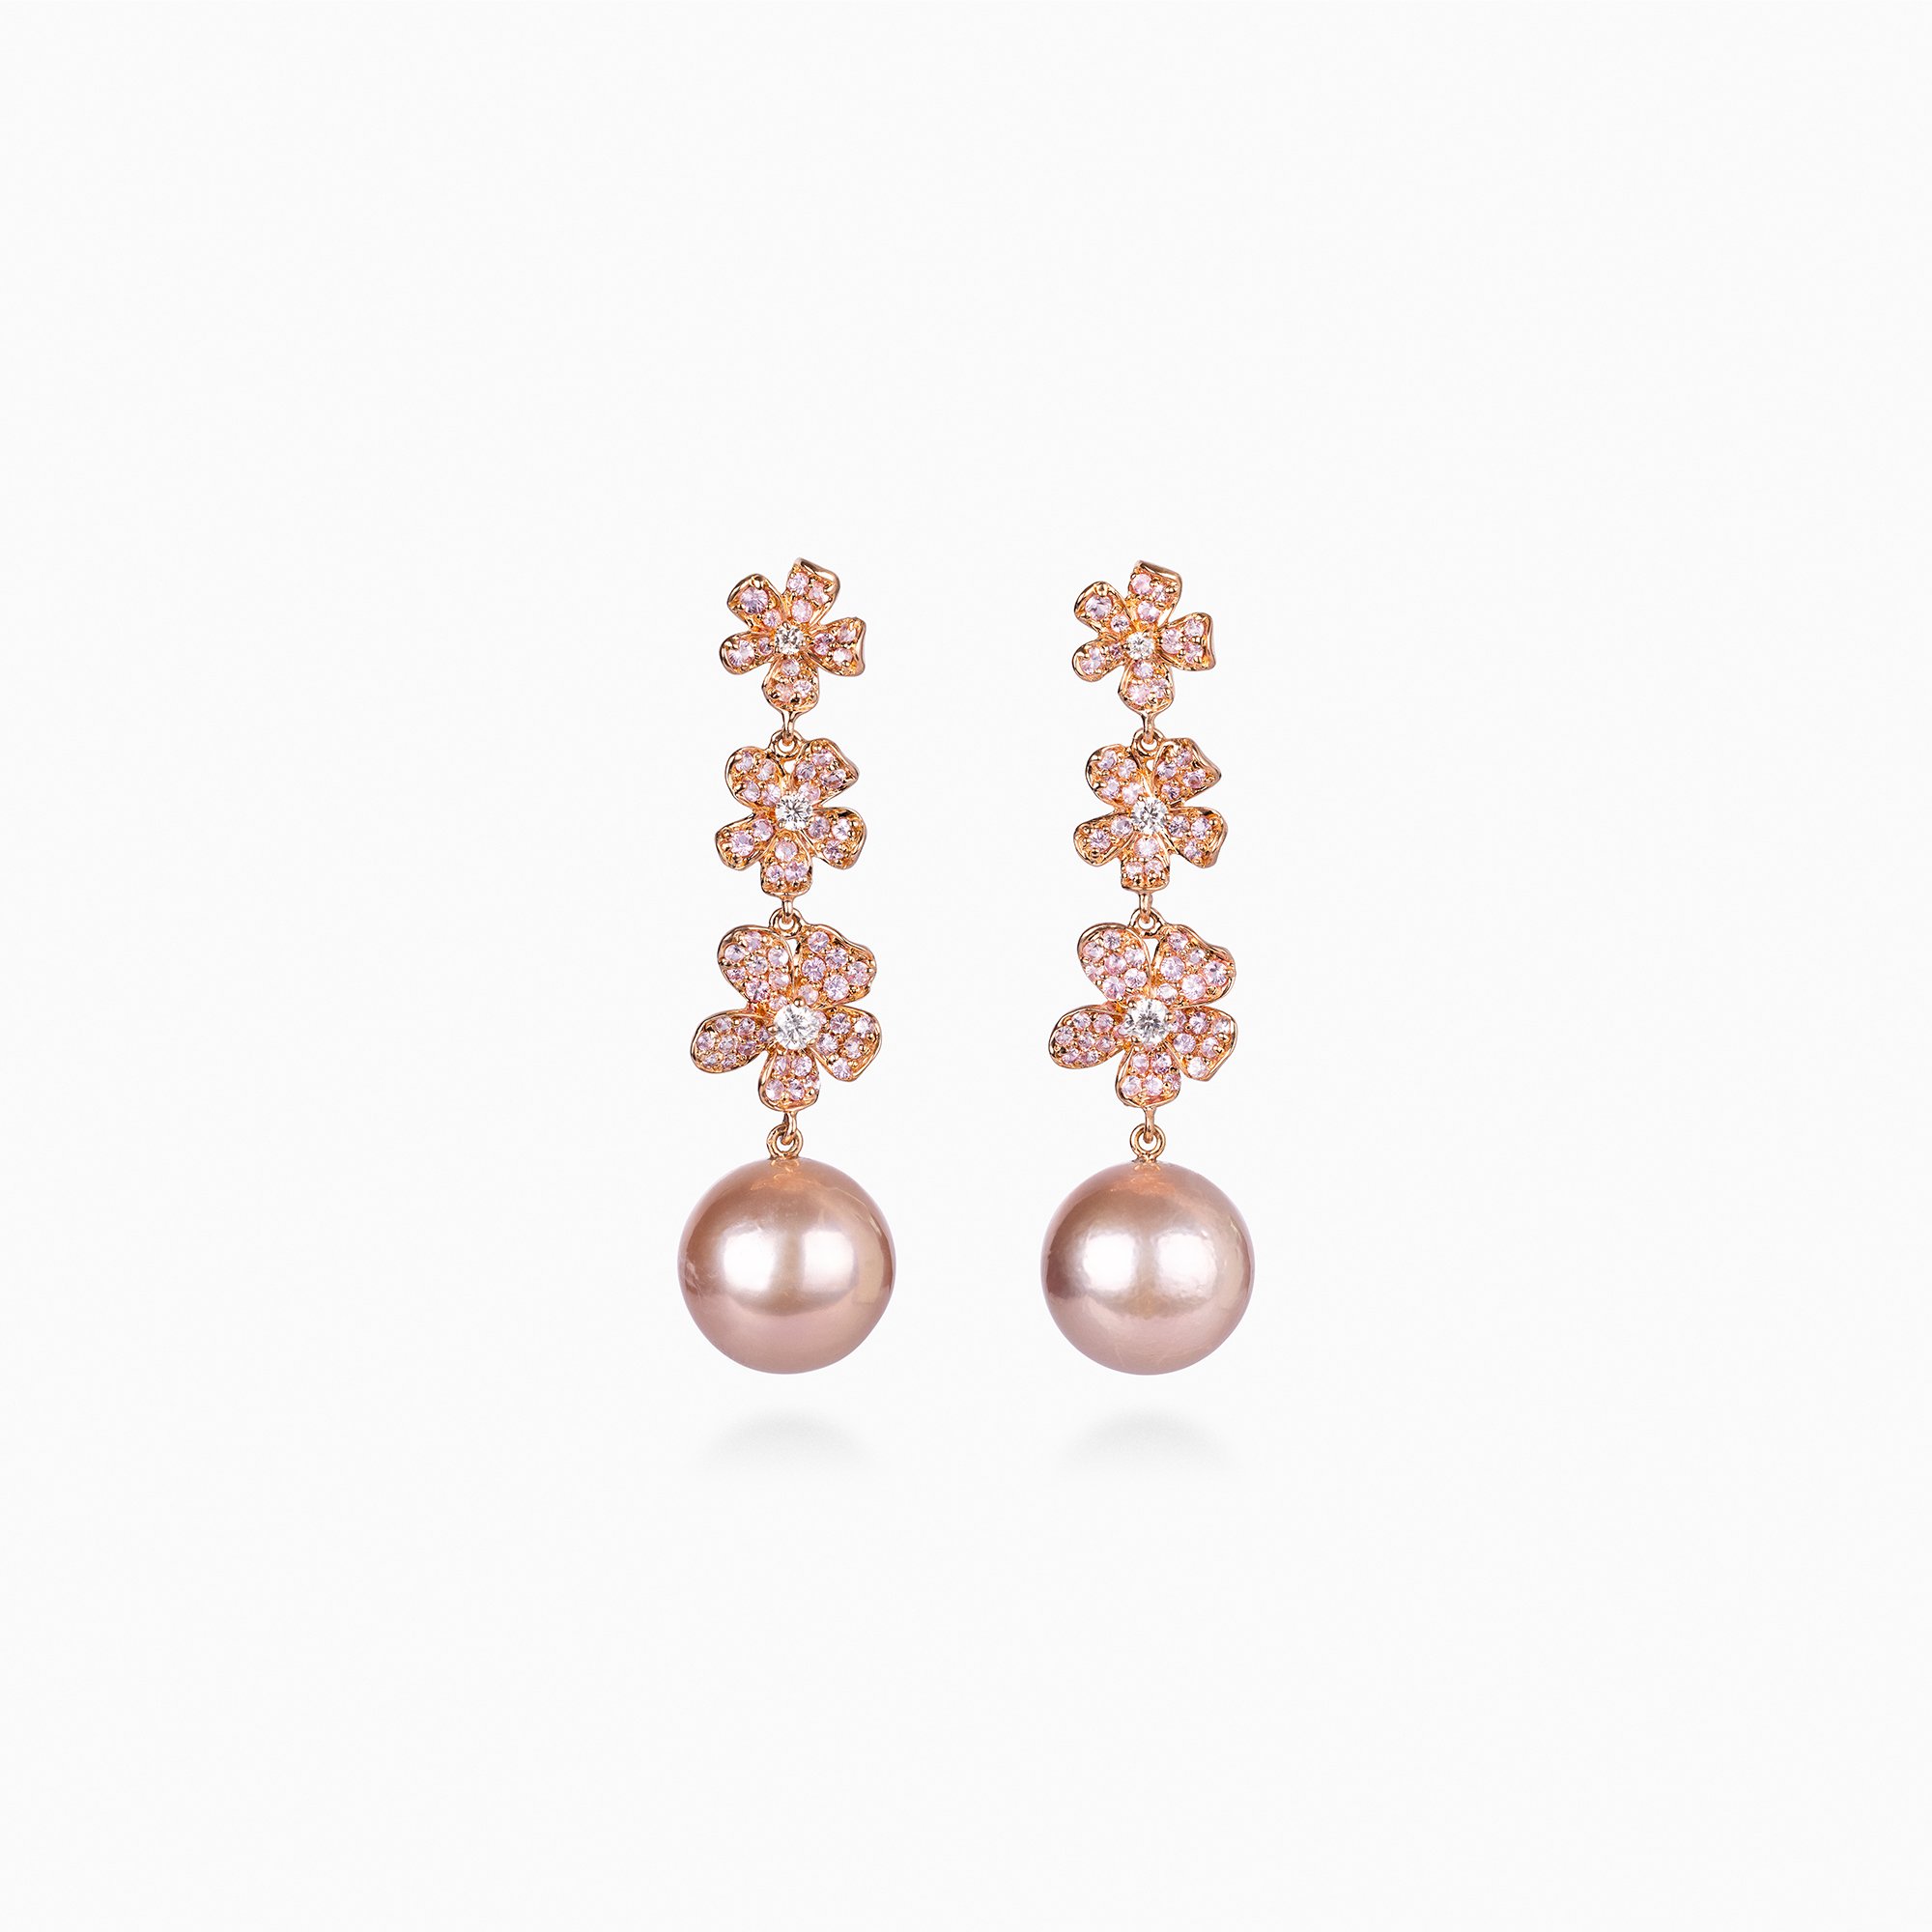 Pimpernel RG Pink Sapphire and Diamond with Pearl Earrings.jpg